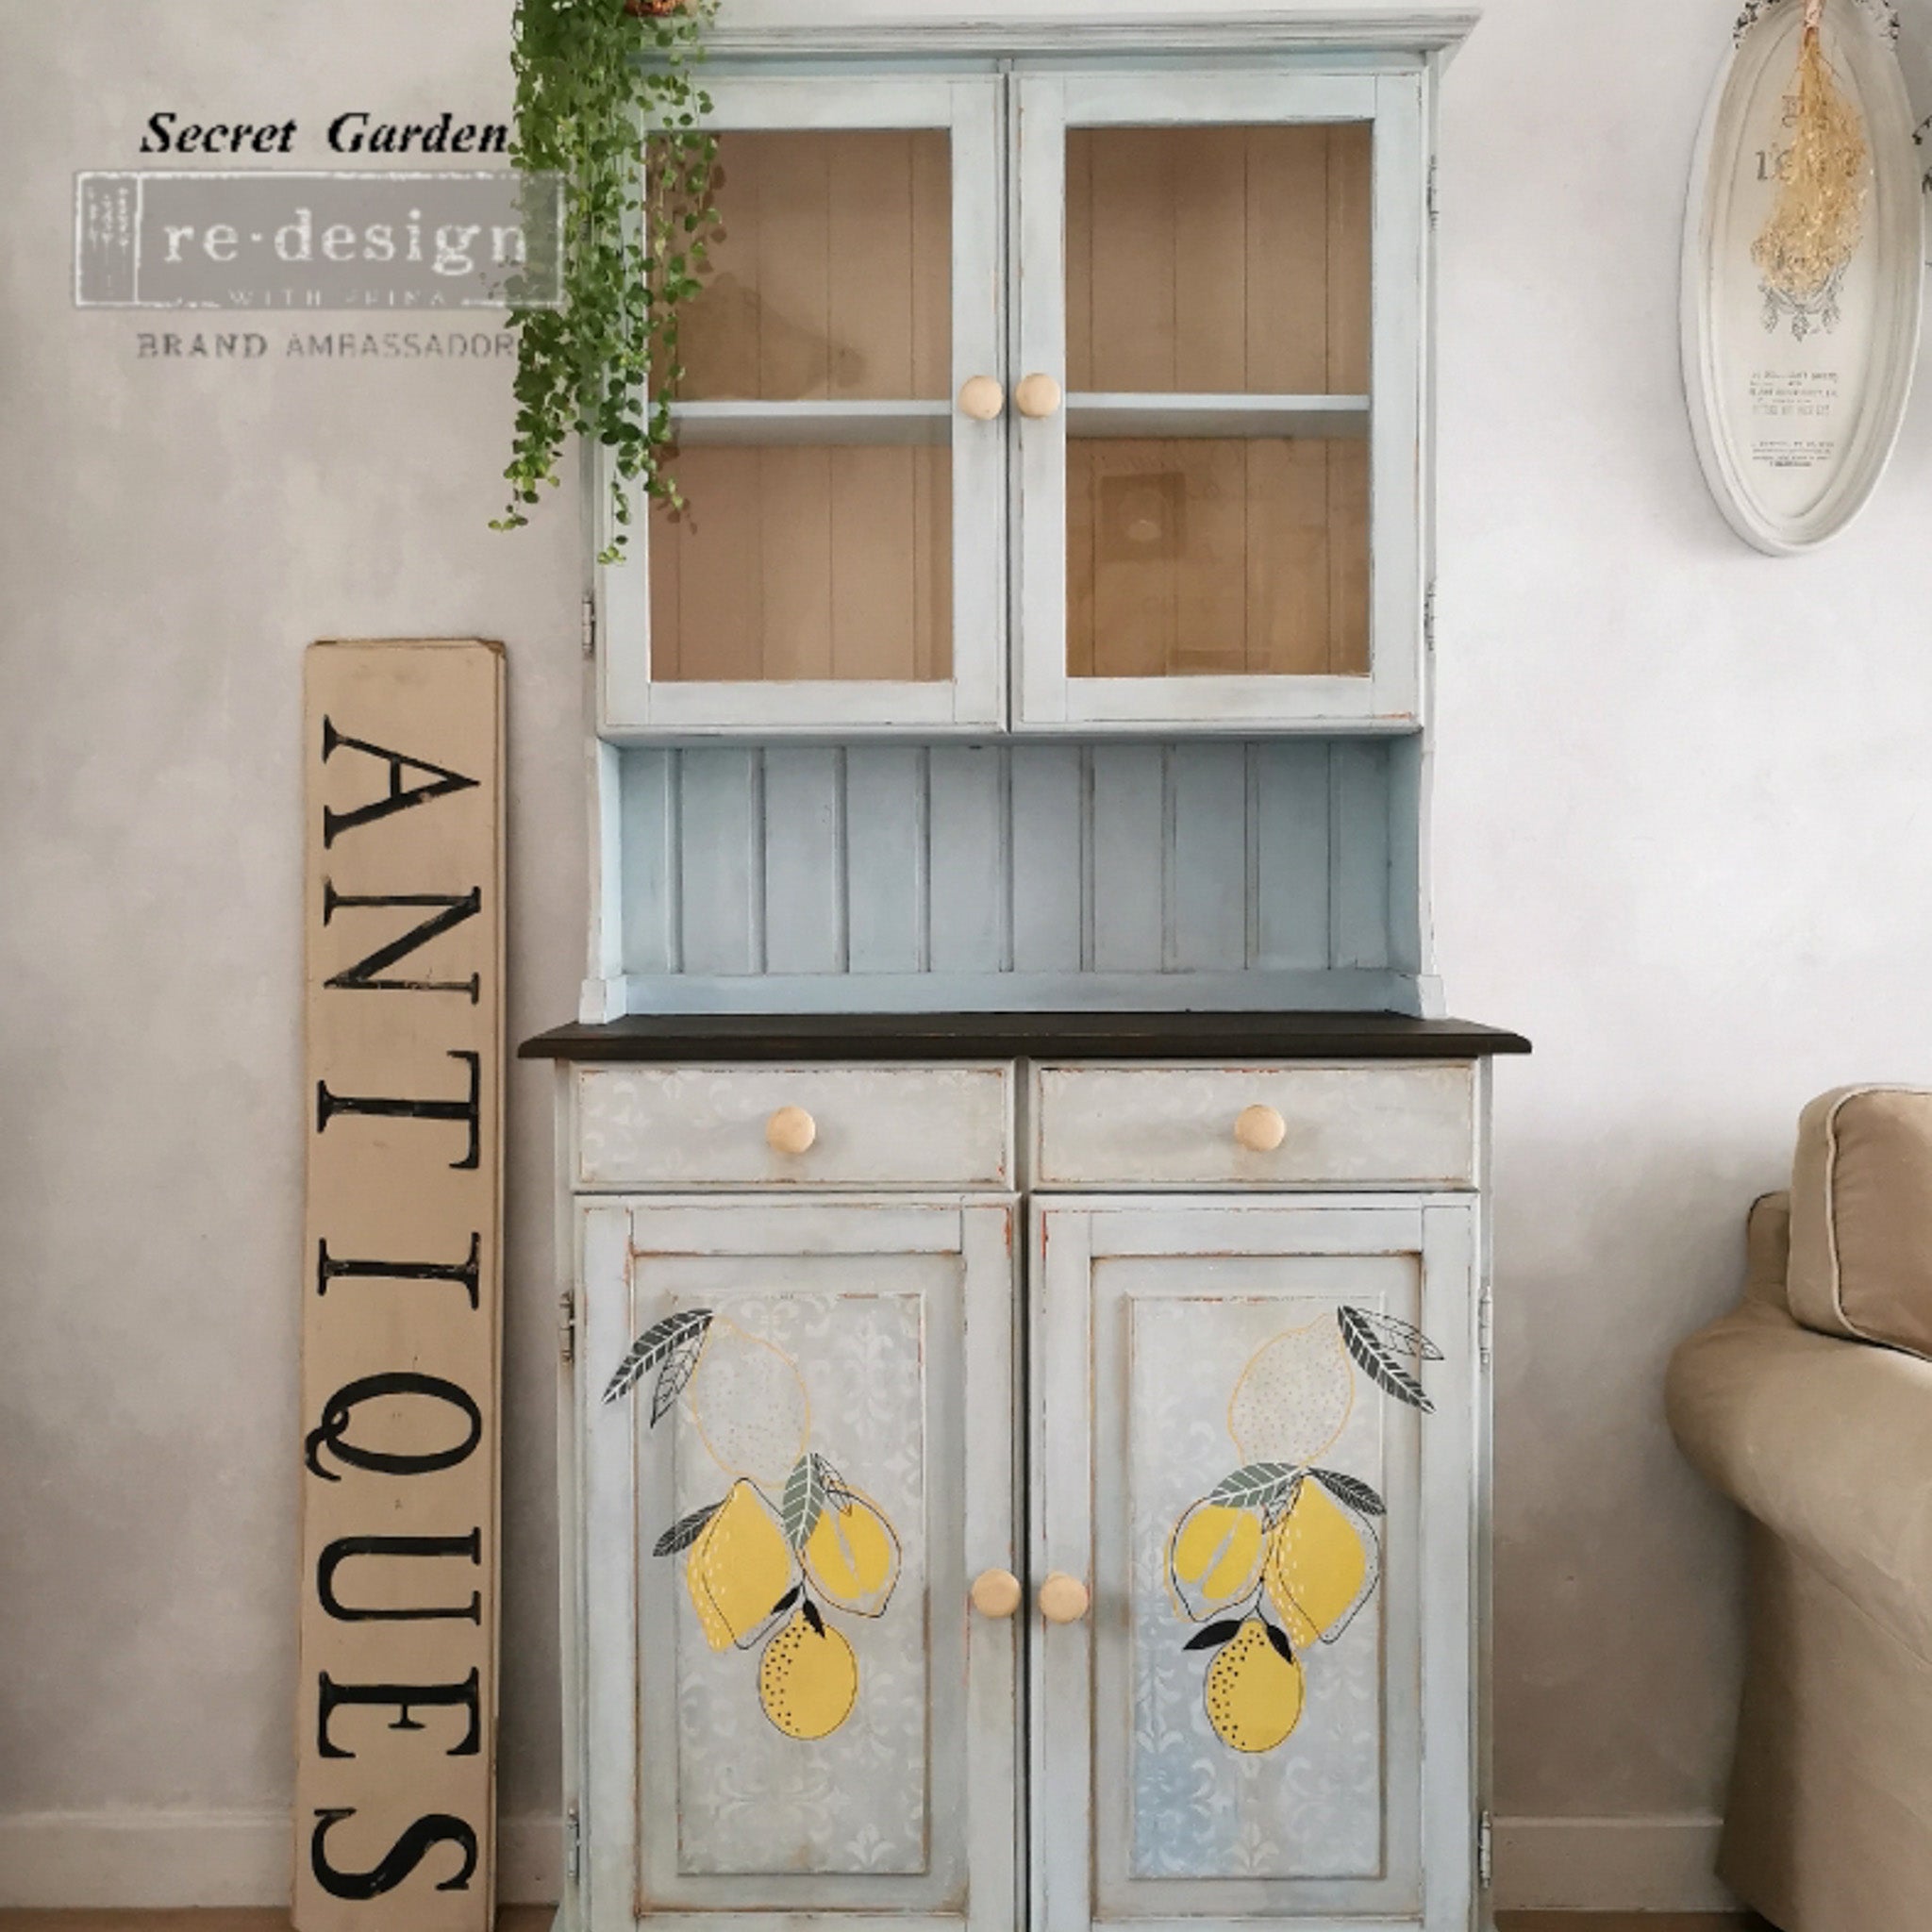 A country style small hutch top cabinet refurbished by Secret Garden is painted a pale blue and features ReDesign with Prima's Lemon small transfer on its bottom doors.